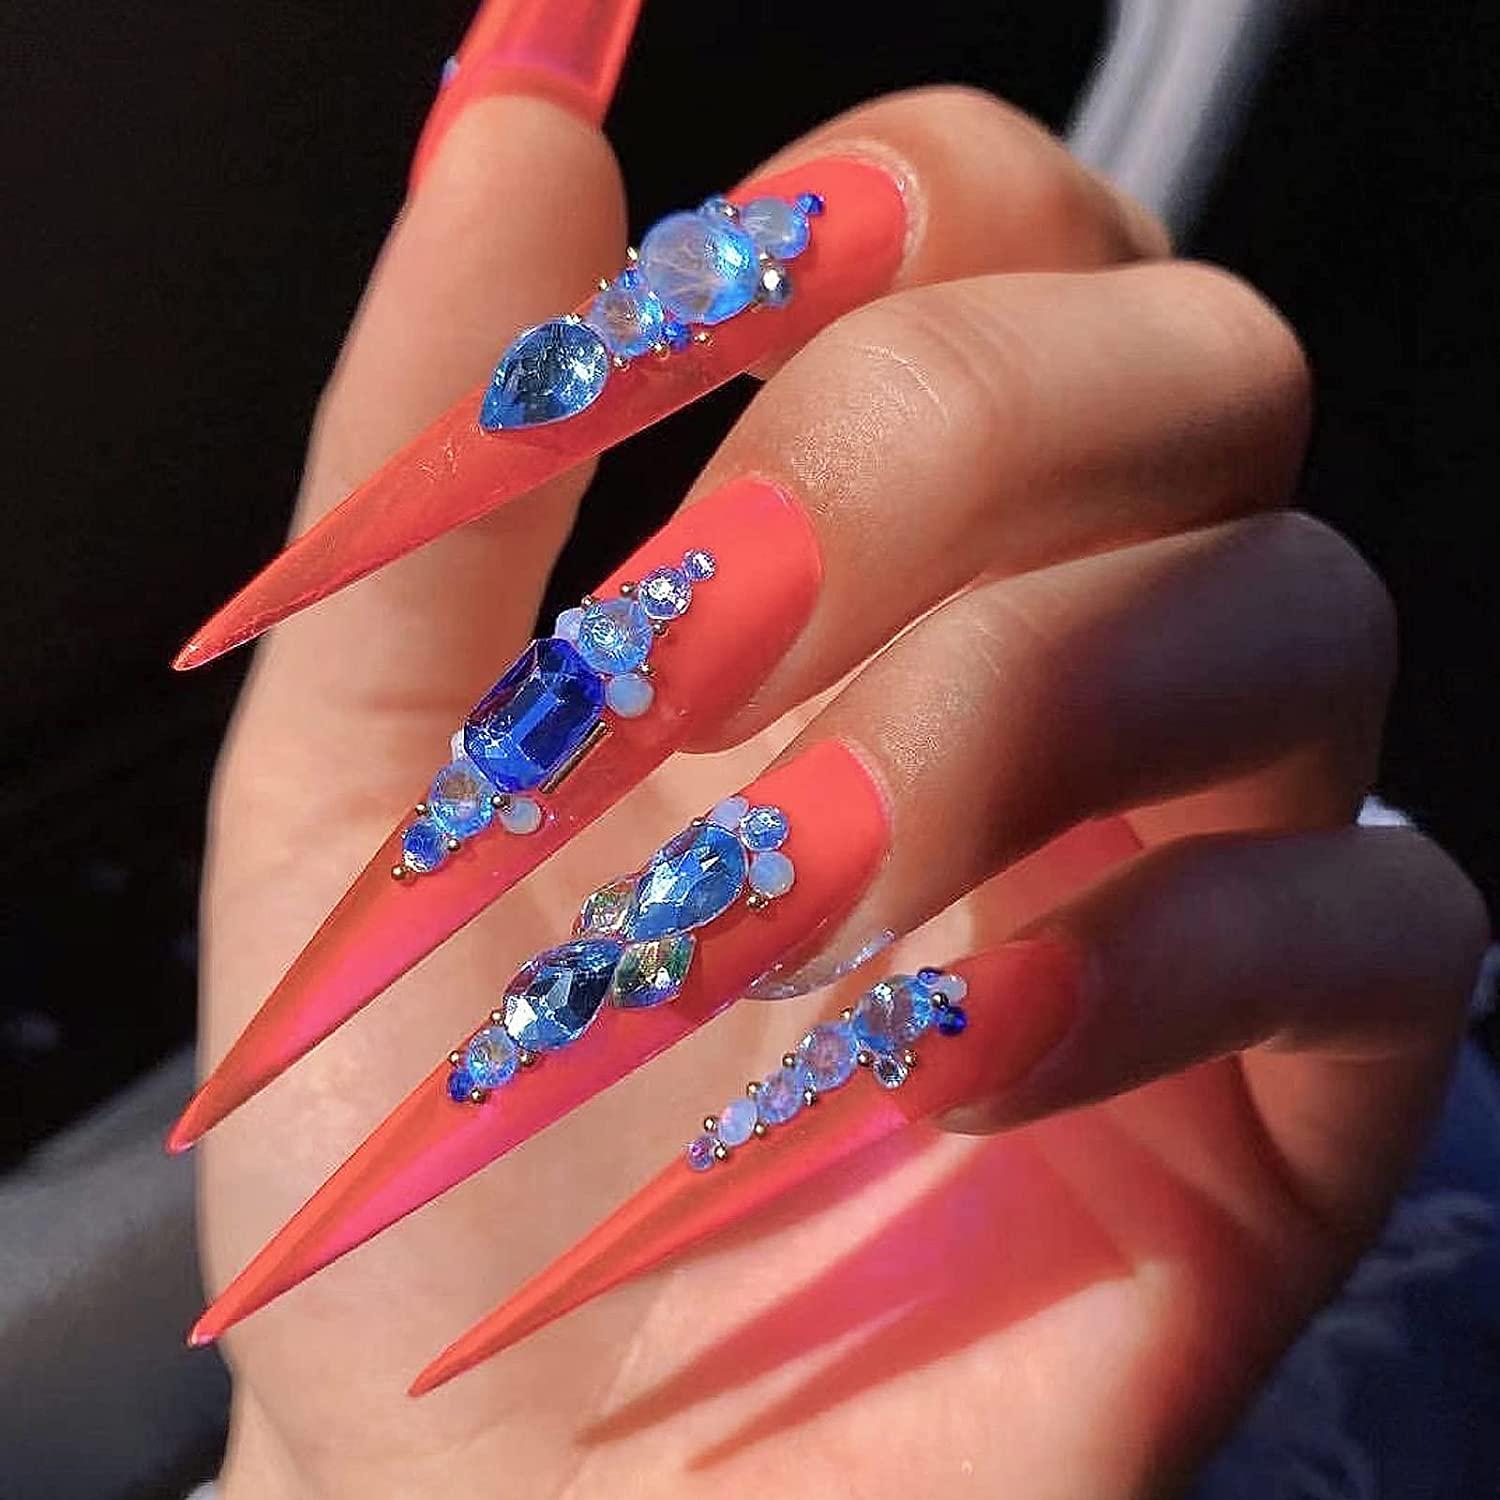 Nail Shapes and Designs: The Latest Fashion